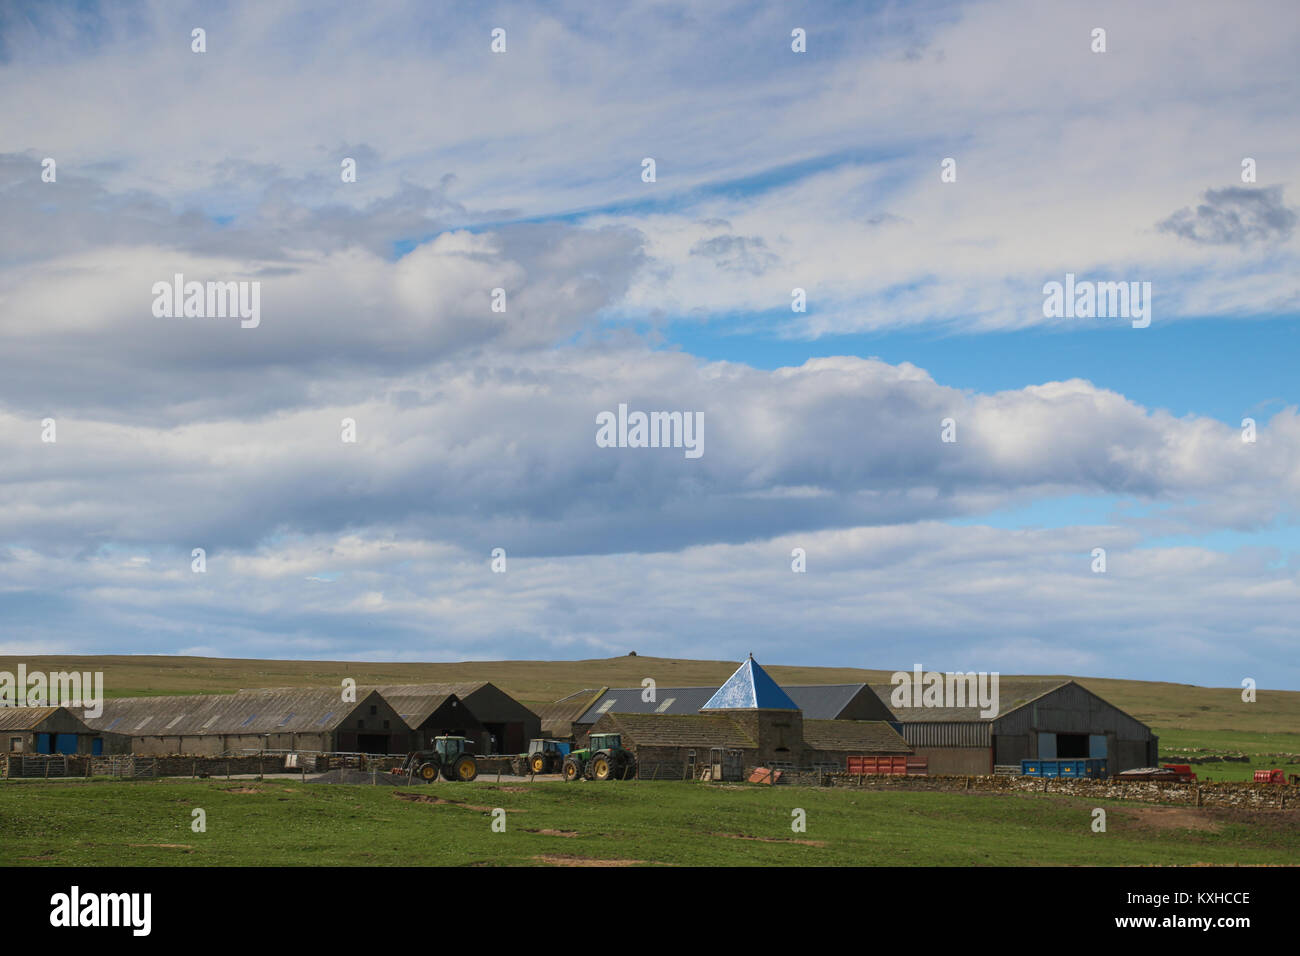 Large, working farm near Skaill House on Orkney Island, Scotland, United Kingdom with many barns, farm equipment, under a huge blue cloud-filled sky. Stock Photo